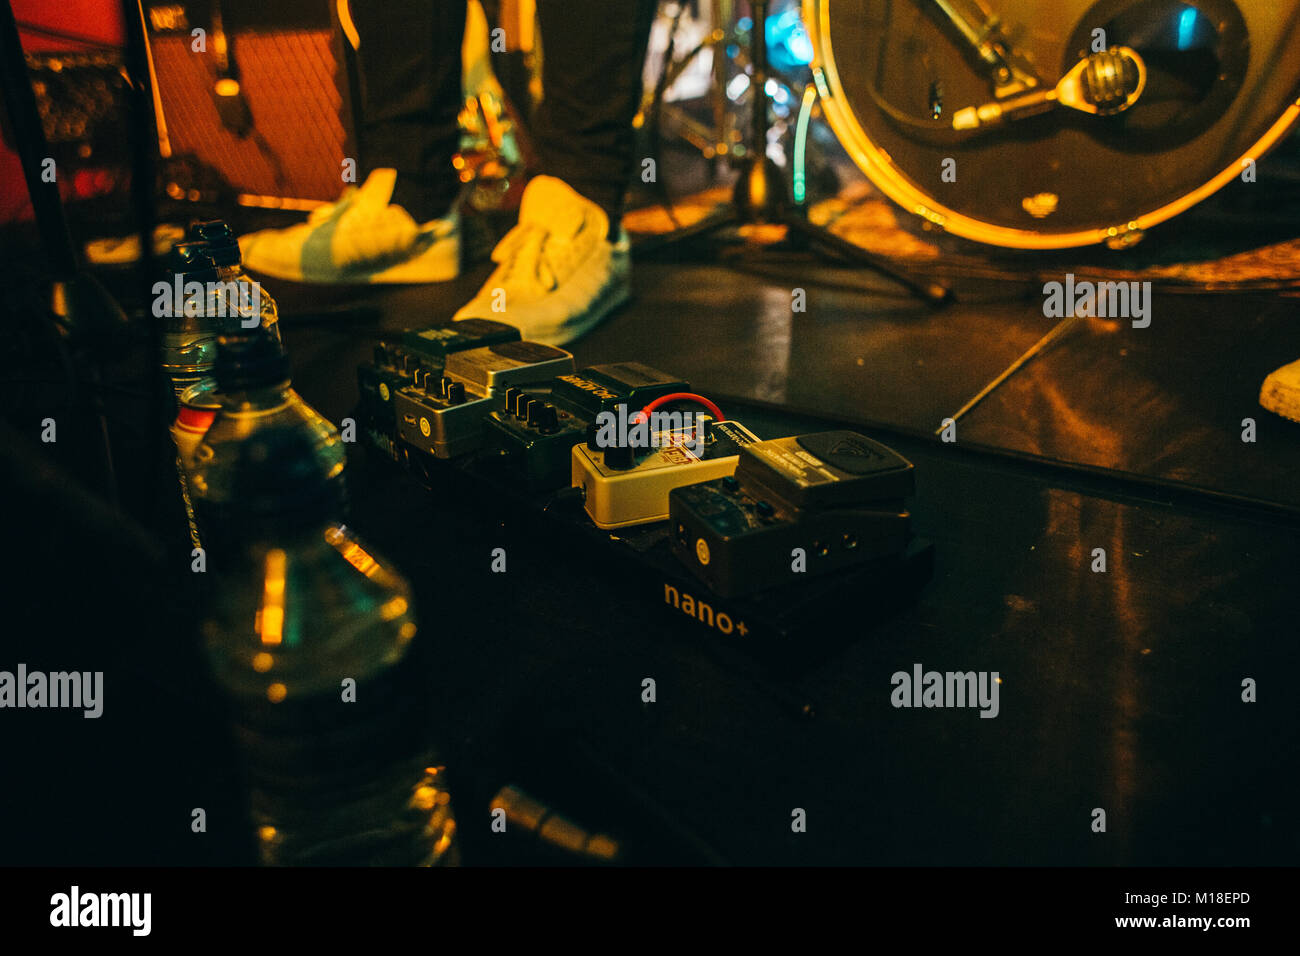 Guitar foot pedals on stage, Cardiff, 23/1/18 Stock Photo